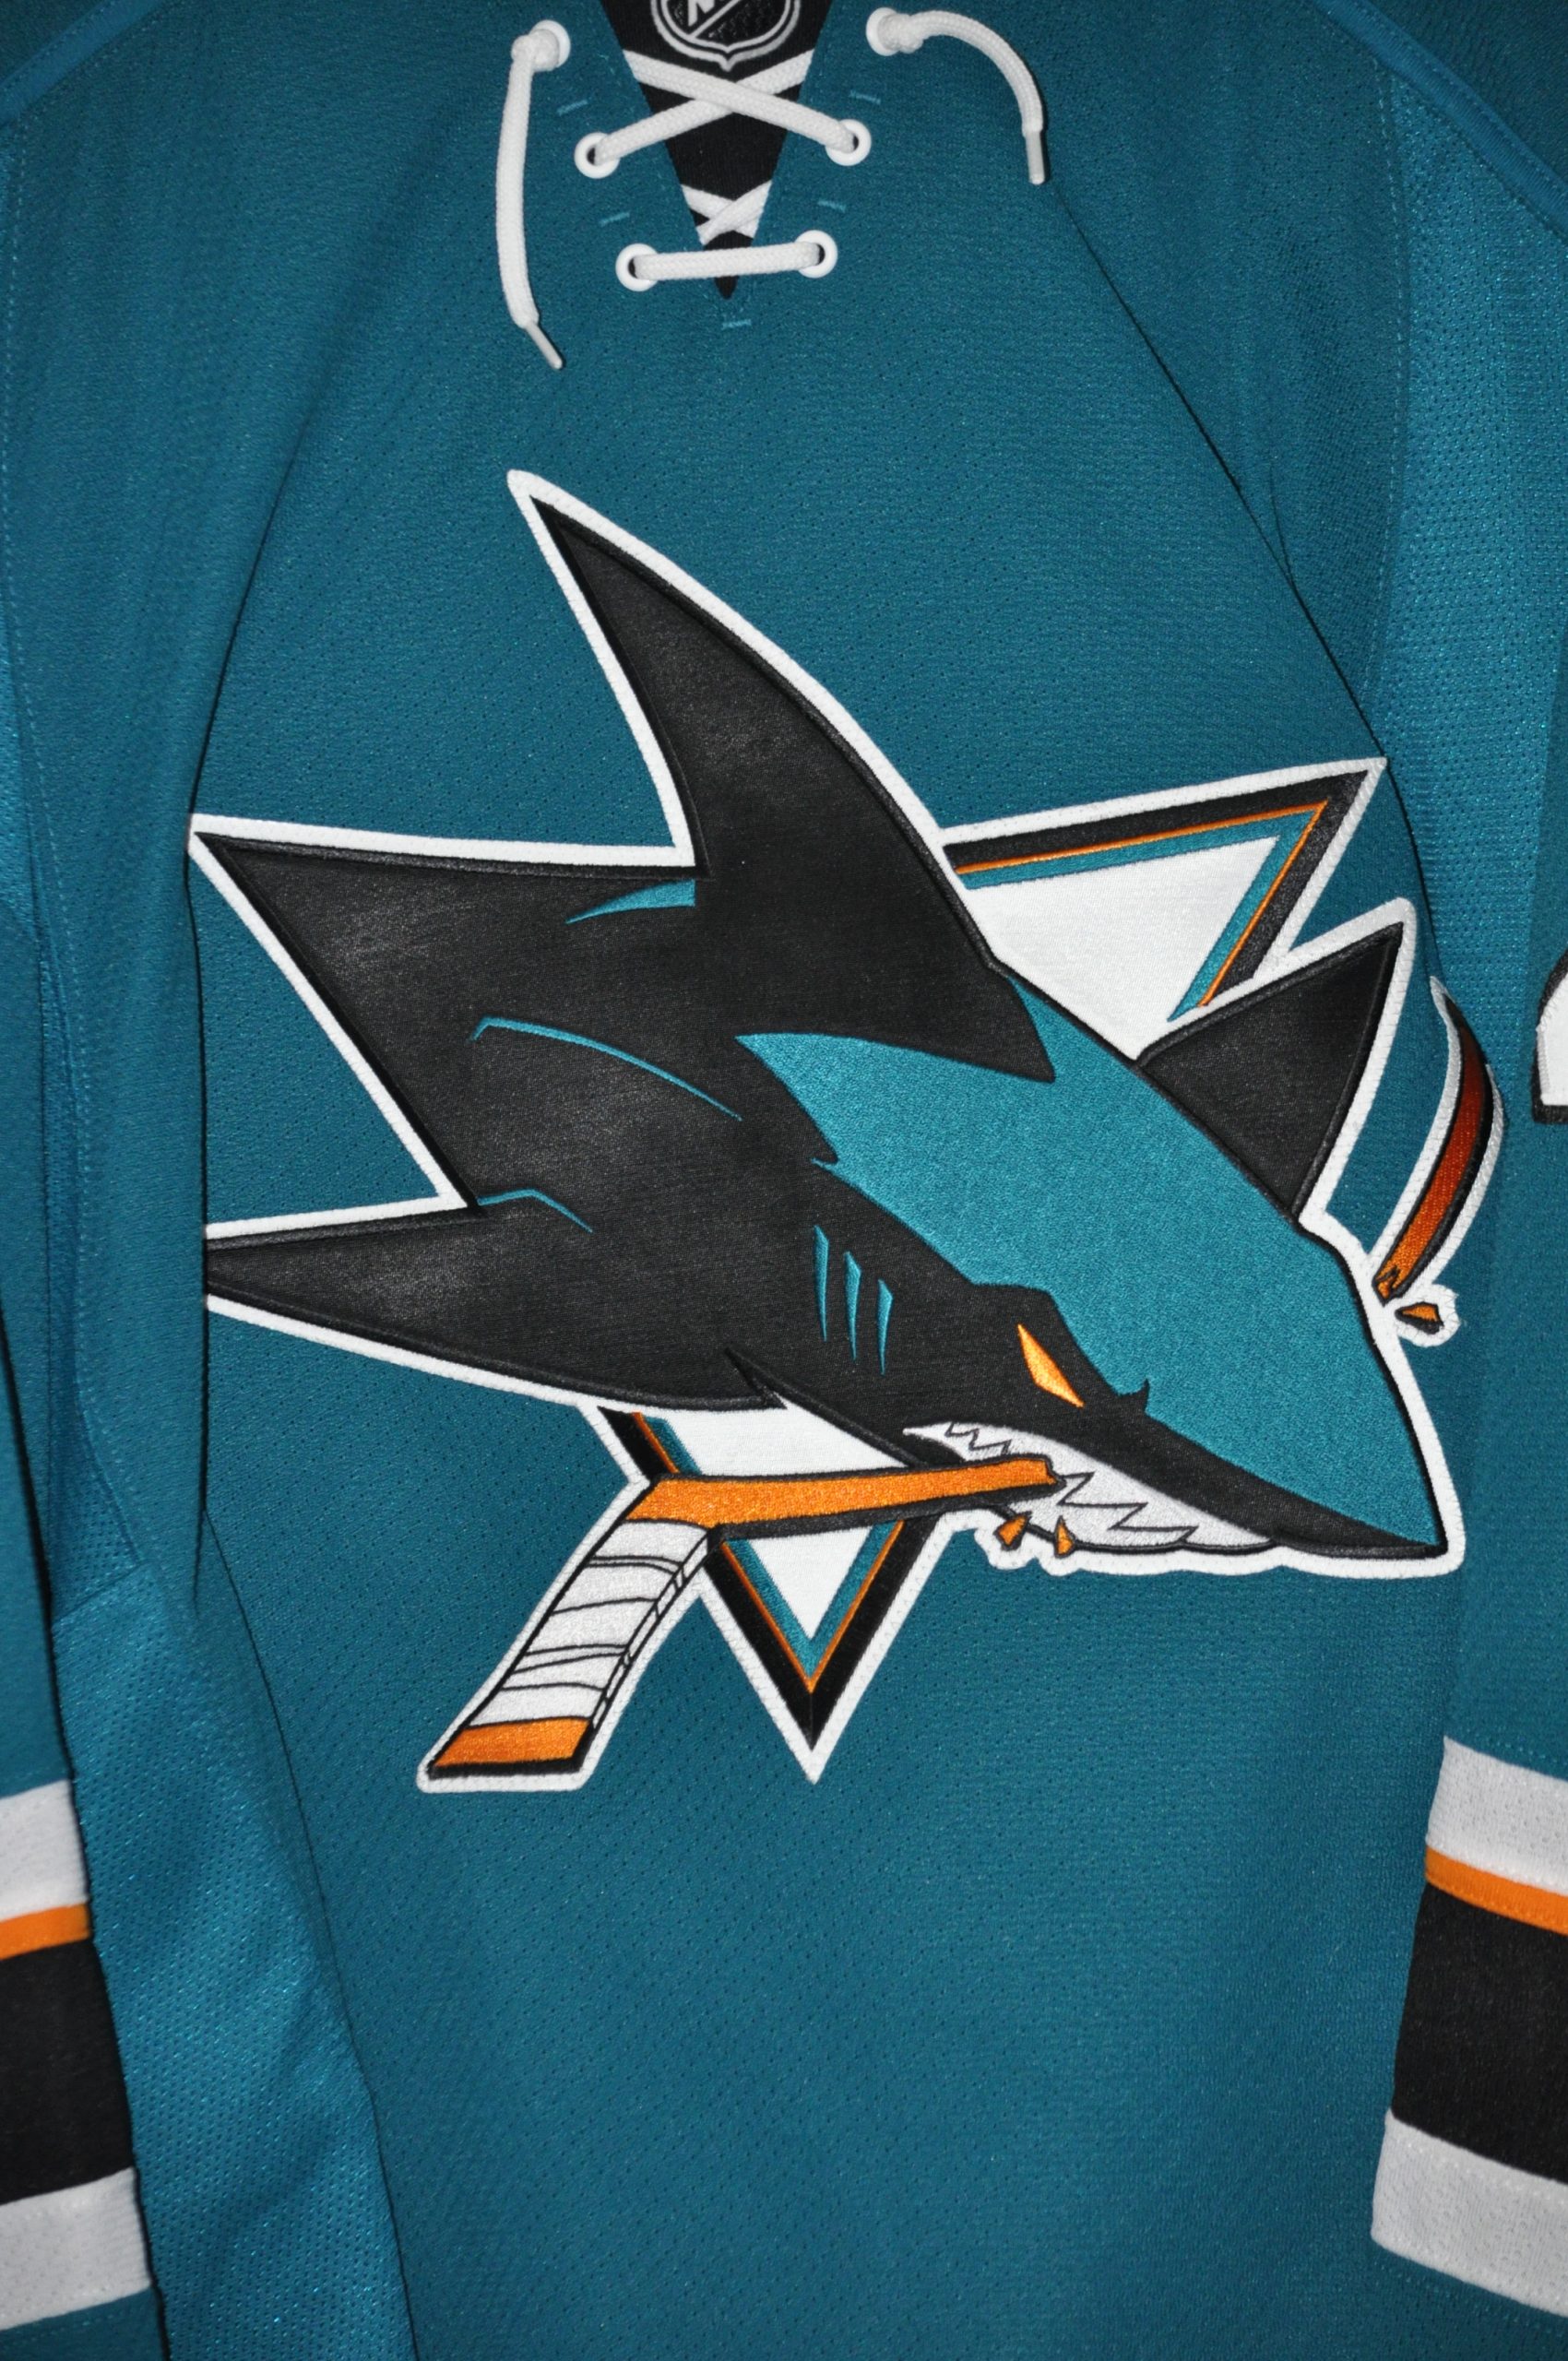 San Jose Sharks Joel Ward Teal Jersey with 100th Anniversary patch. –  Hockey Jersey